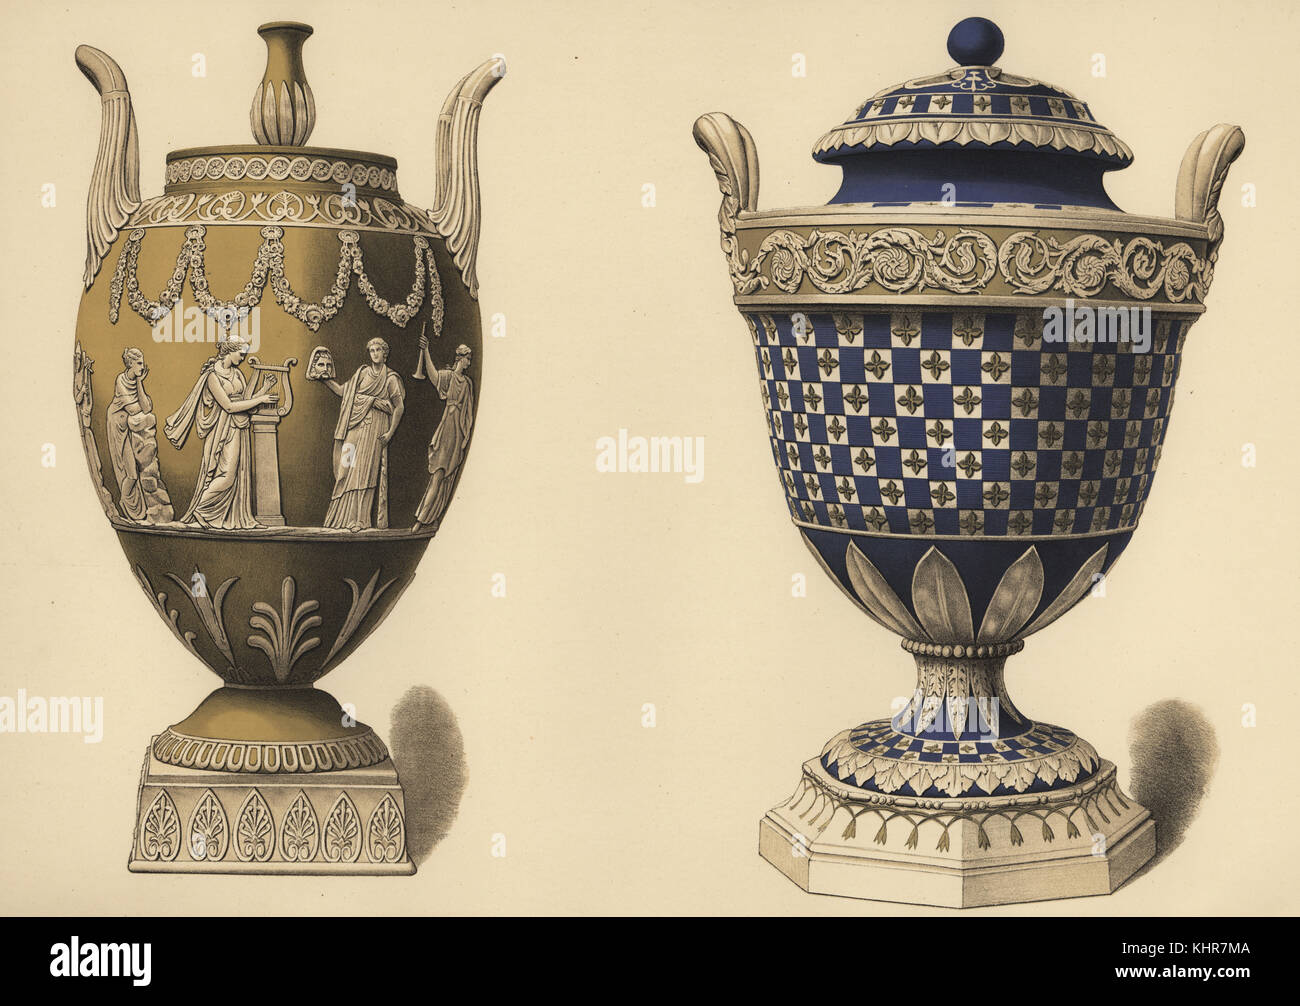 Vase with reliefs of the nine Muses and Apollo, and tricolor vase with  quatrefoils in green and white on blue. Chromolithograph by W. Griggs from  Frederick Rathbone's Old Wedgwood, the Decorative or